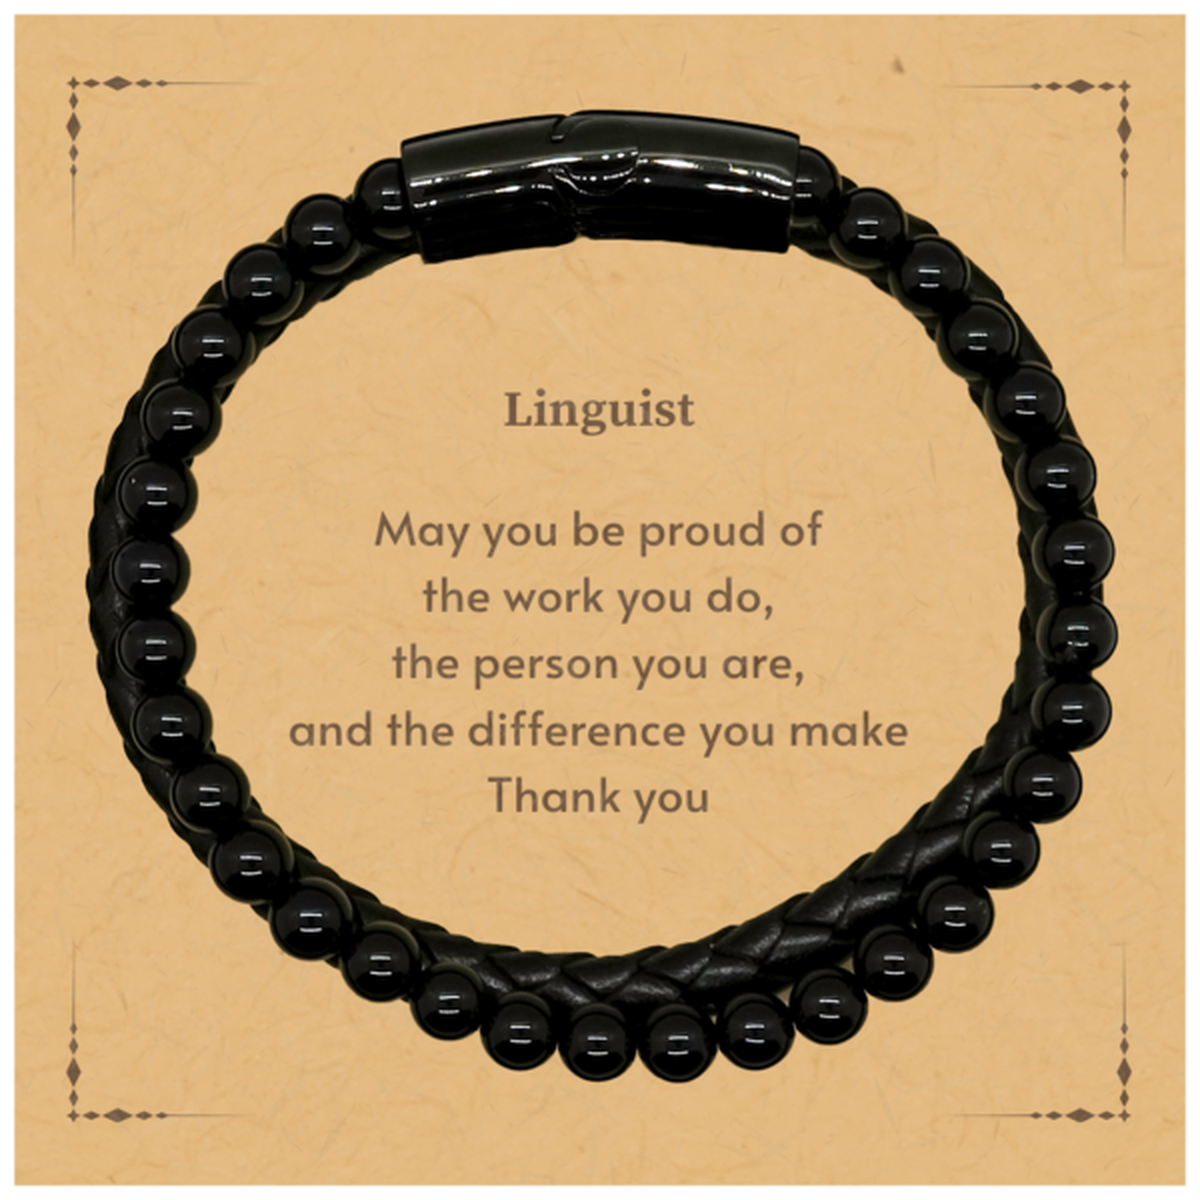 Heartwarming Stone Leather Bracelets Retirement Coworkers Gifts for Linguist, Linguist May You be proud of the work you do, the person you are Gifts for Boss Men Women Friends